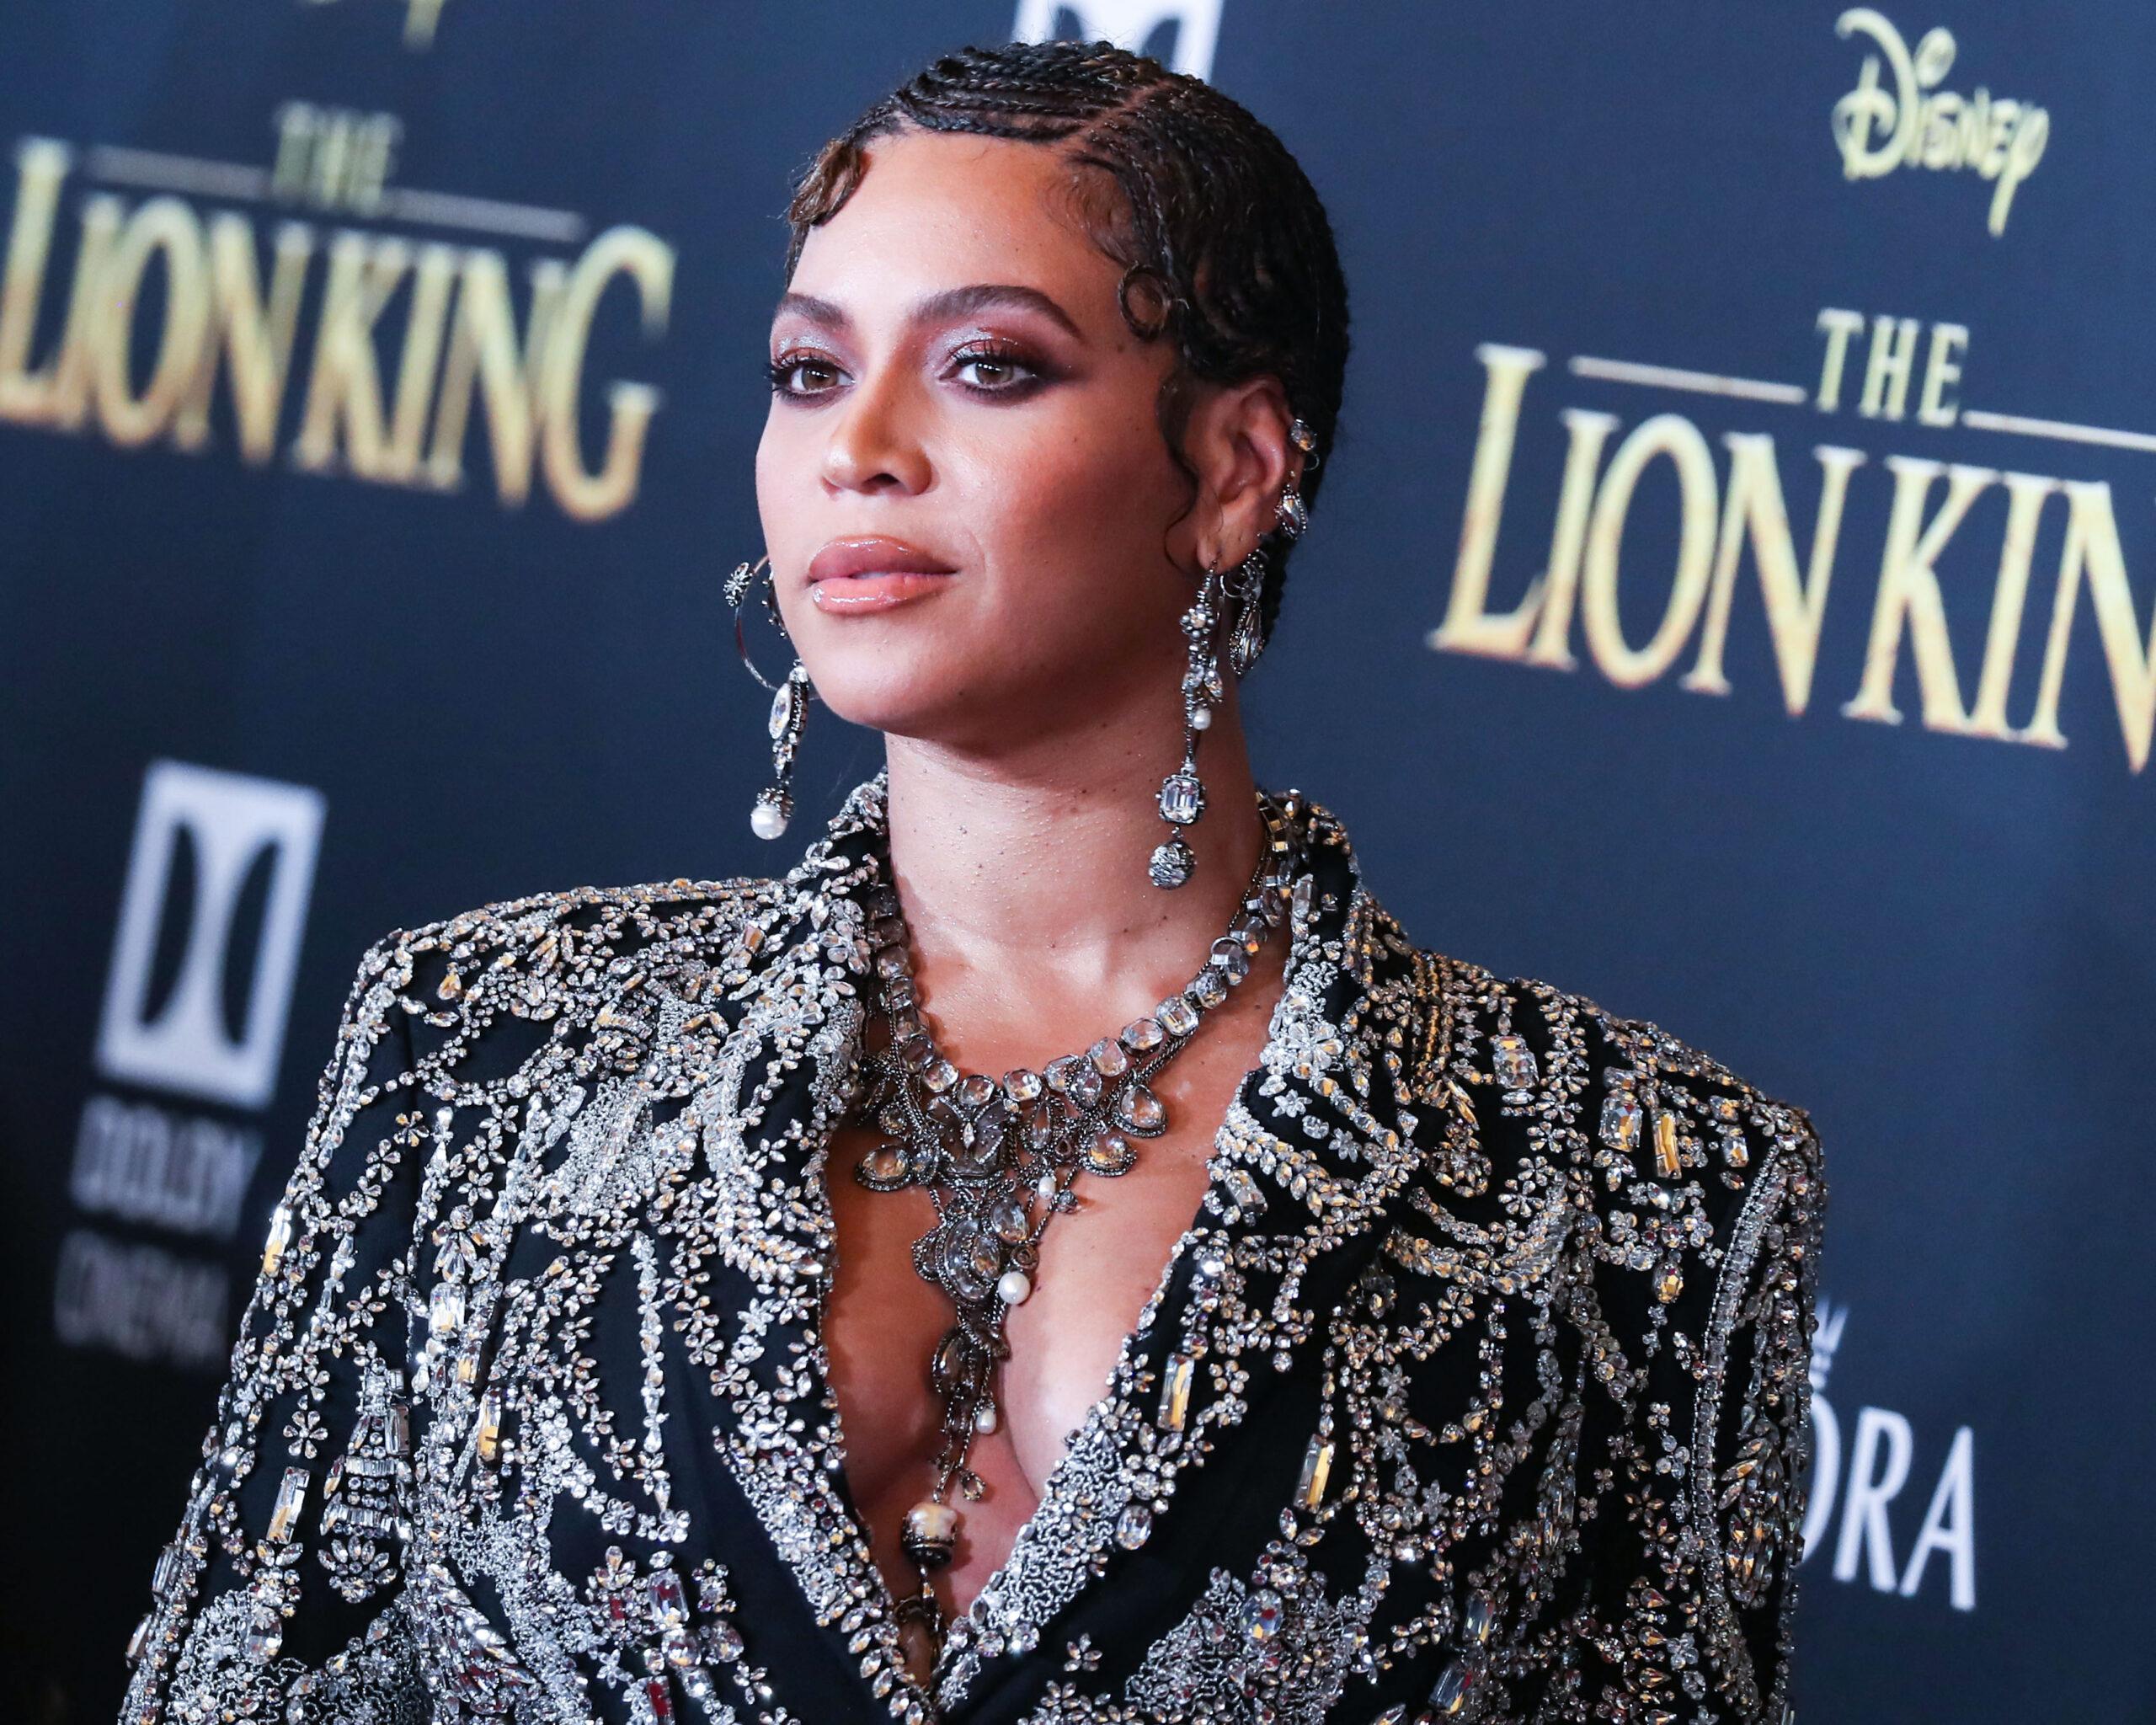 Beyoncé Knowles Carter wearing an outfit by Alexander McQueen and Lorraine Schwartz jewelry arrives at the World Premiere Of Disney's 'The Lion King'